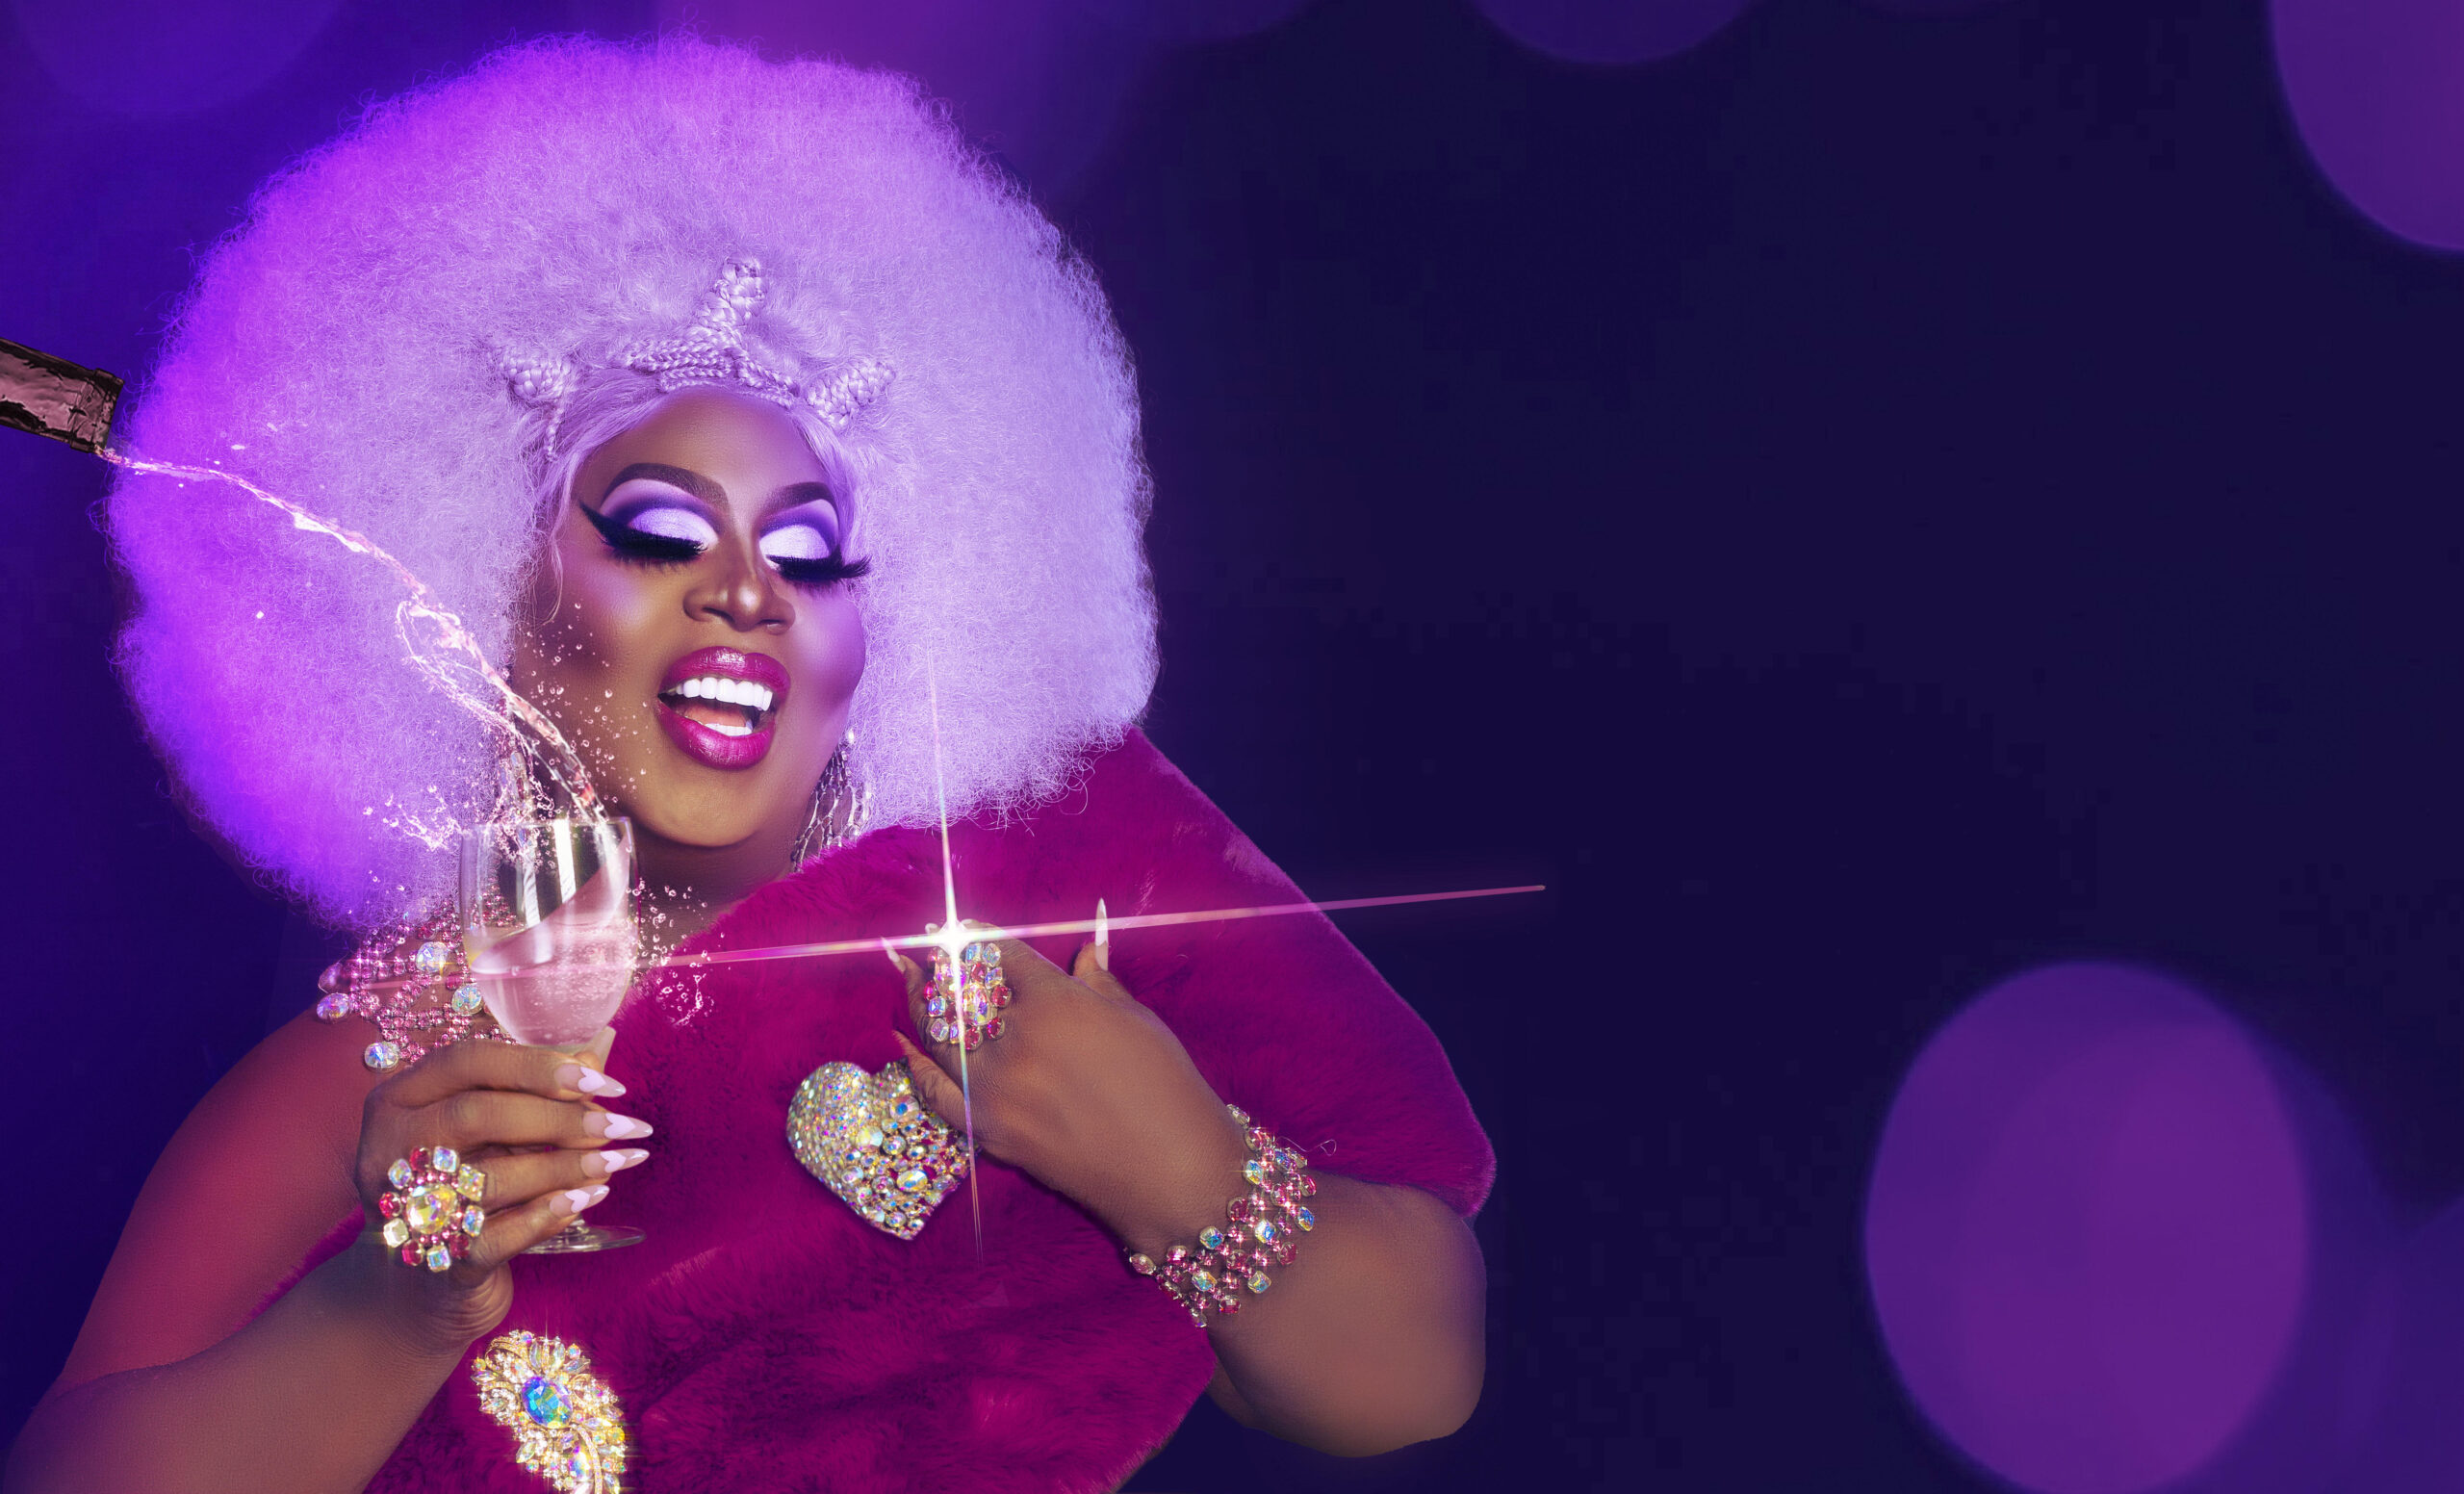 Latrice Royale – Large and In Charge, Chunky yet Funky!